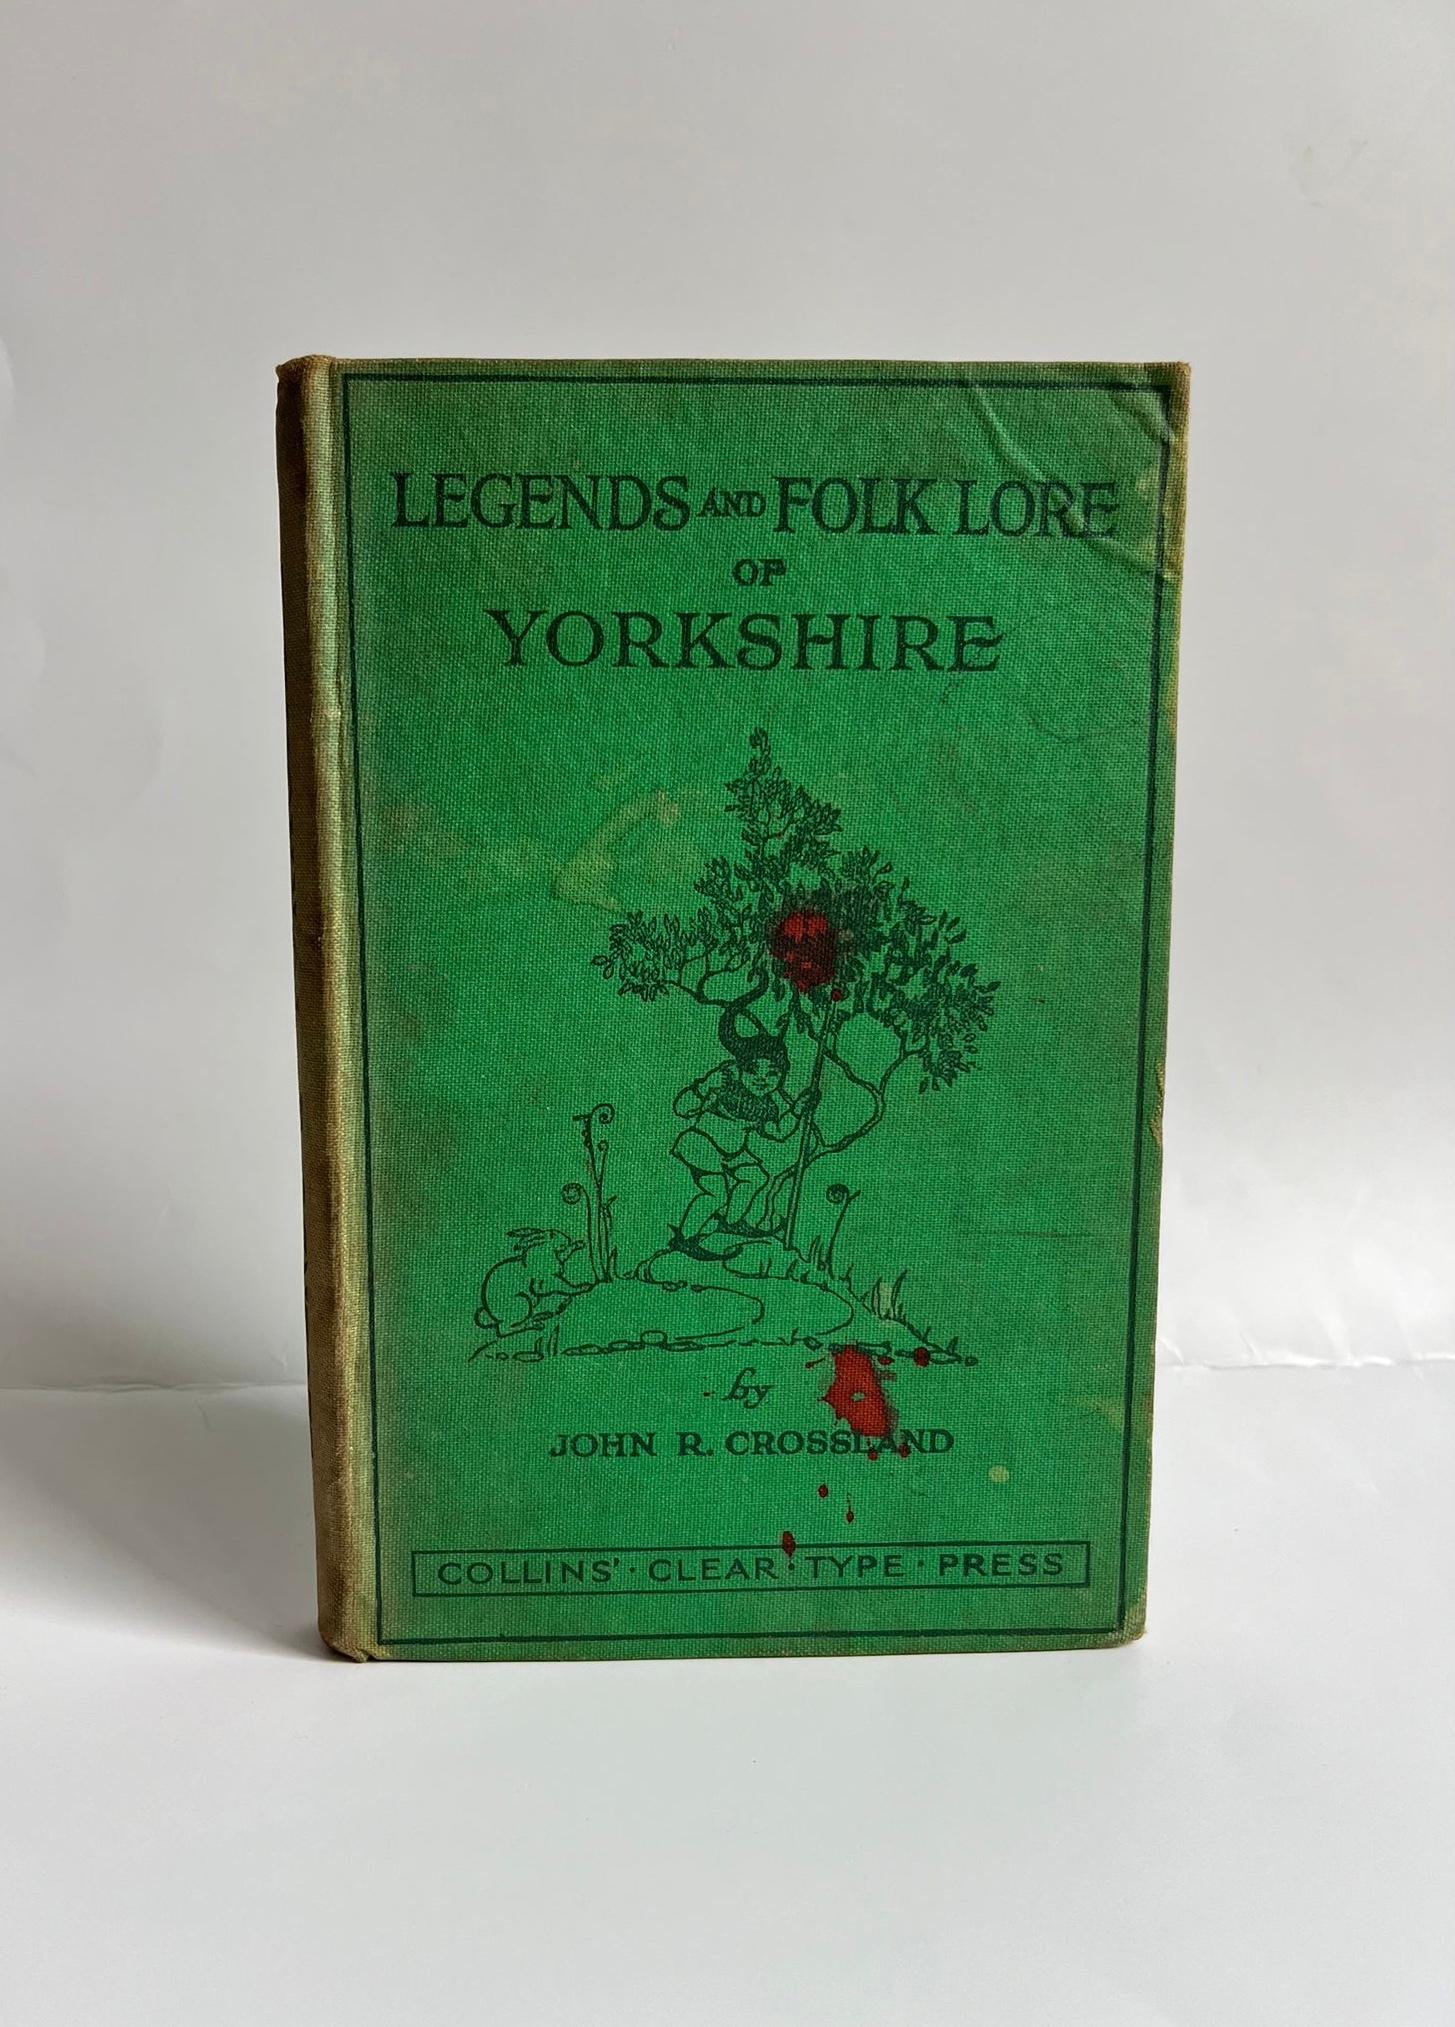 Legends And Folklore of Yorkshire by John R. Crossland